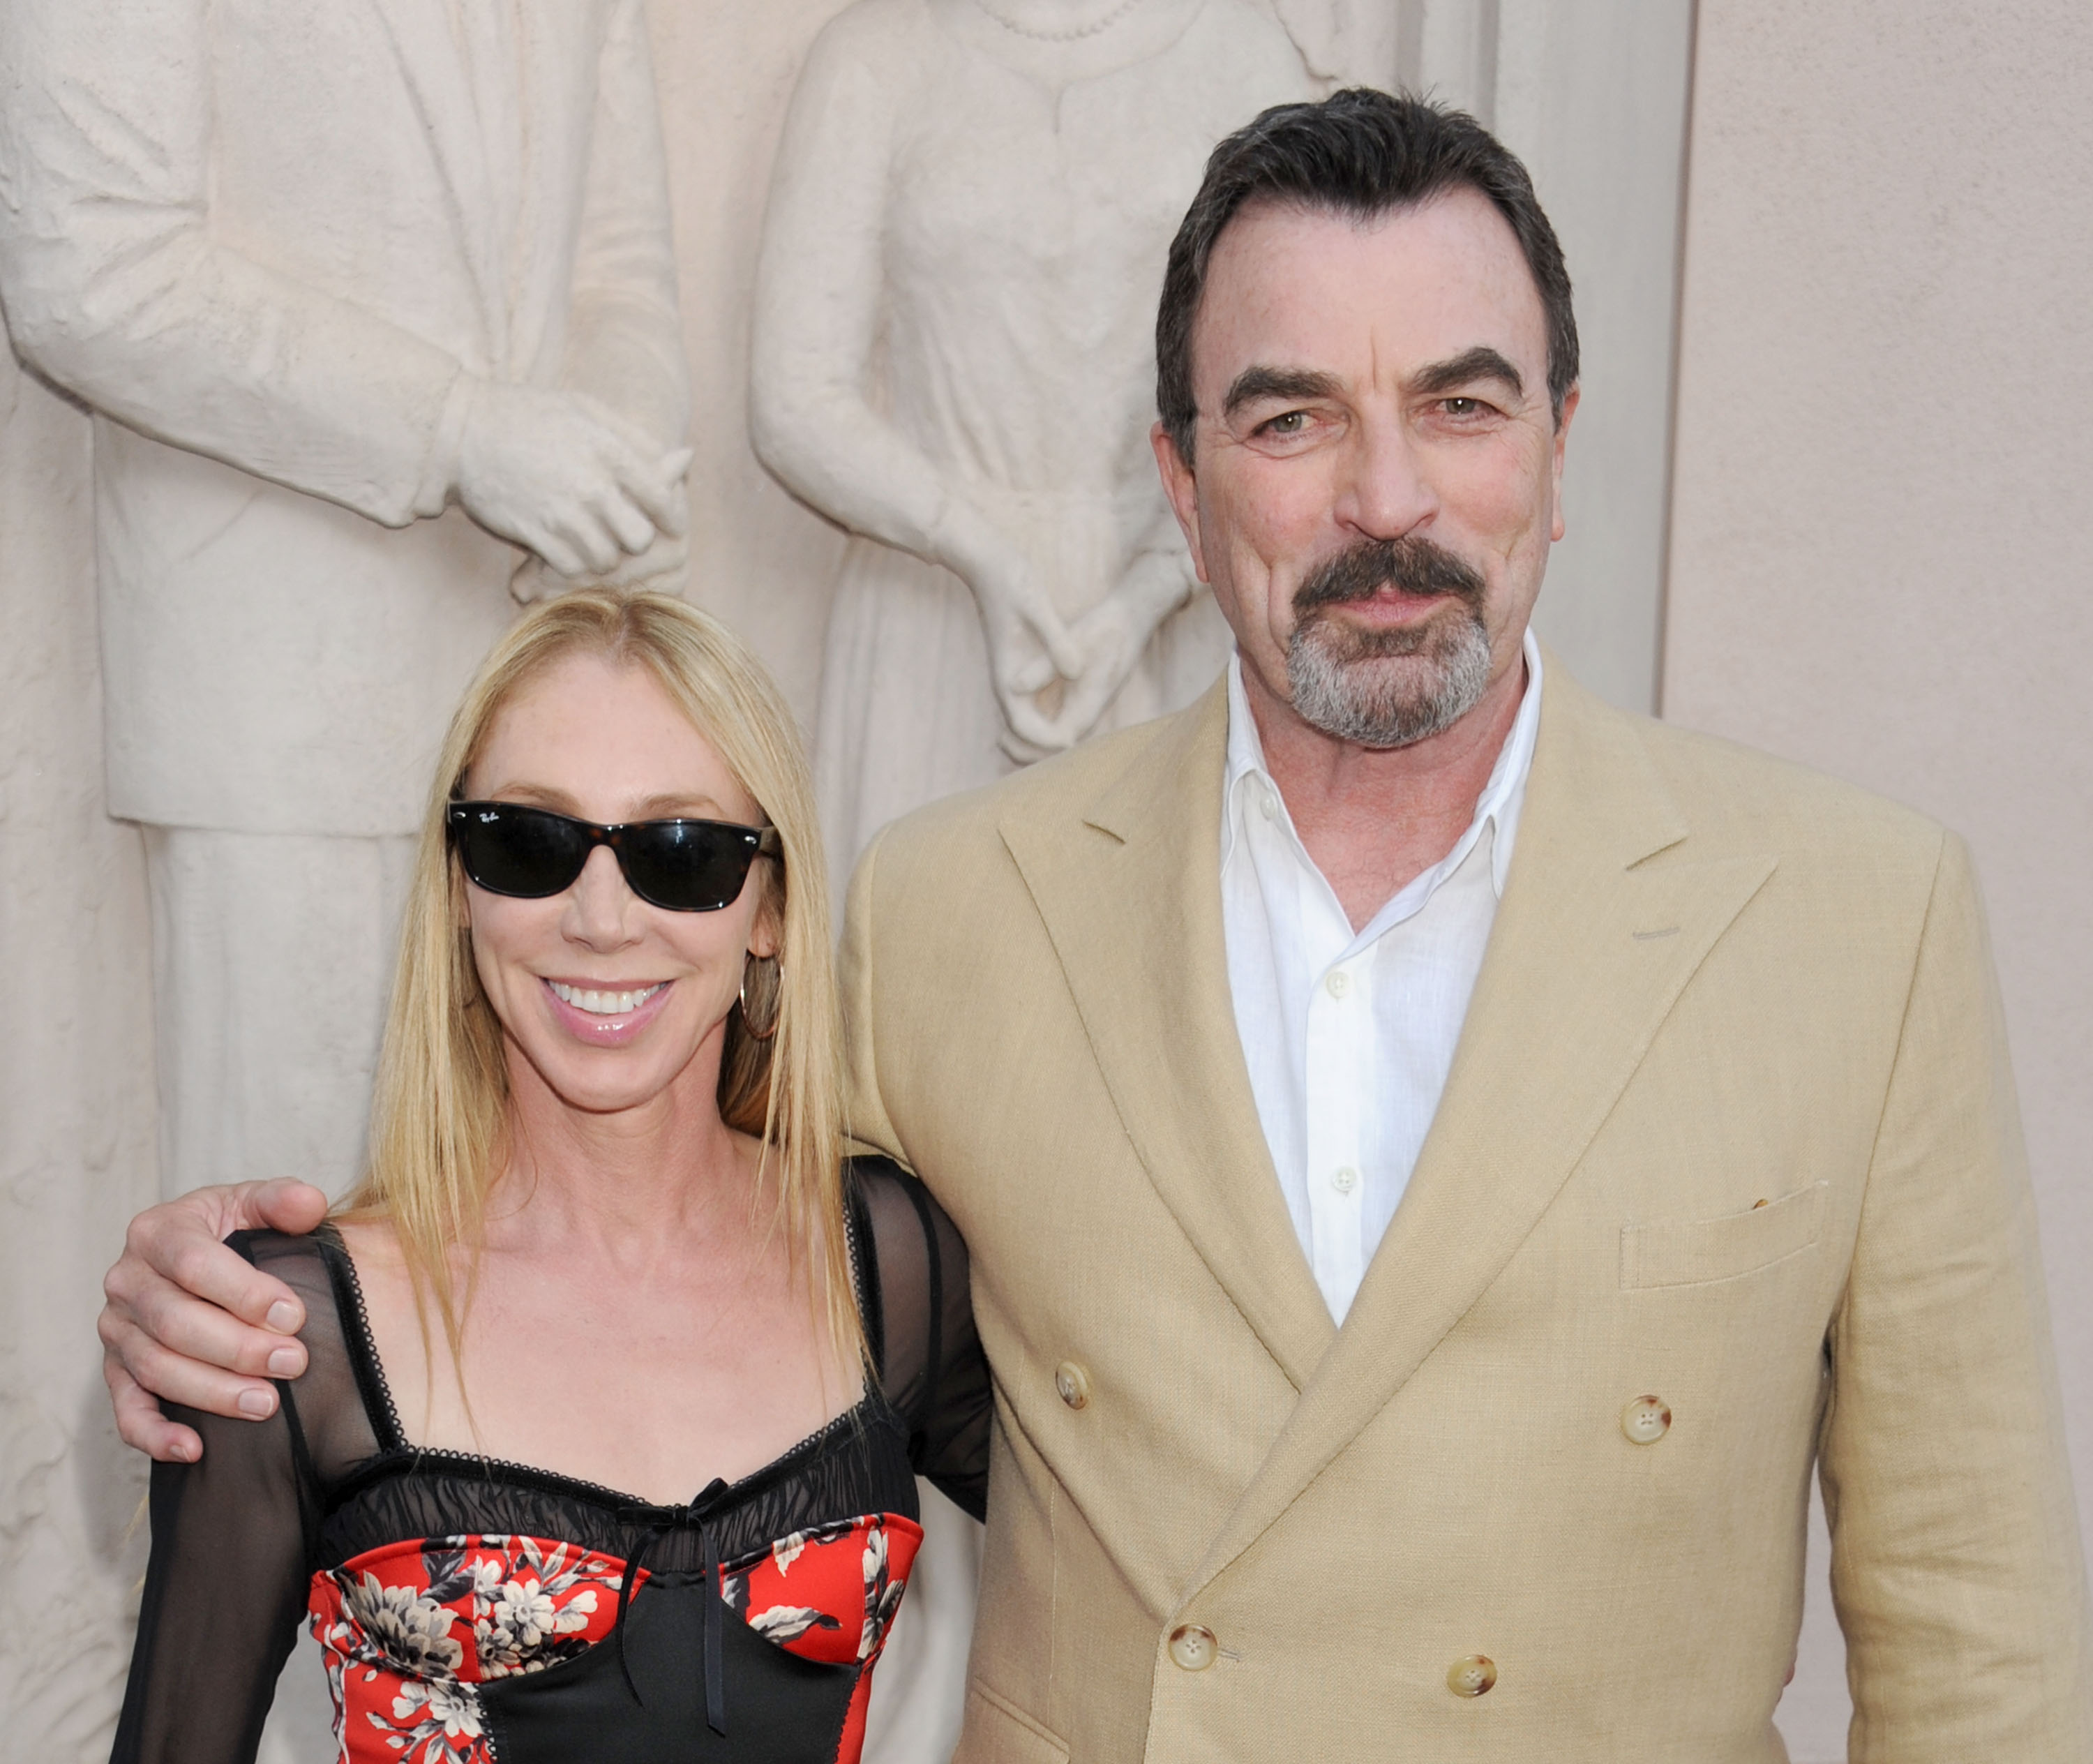 Tom Selleck and Jillie Mack in North Hollywood, California on June 5, 2012 | Source: Getty images